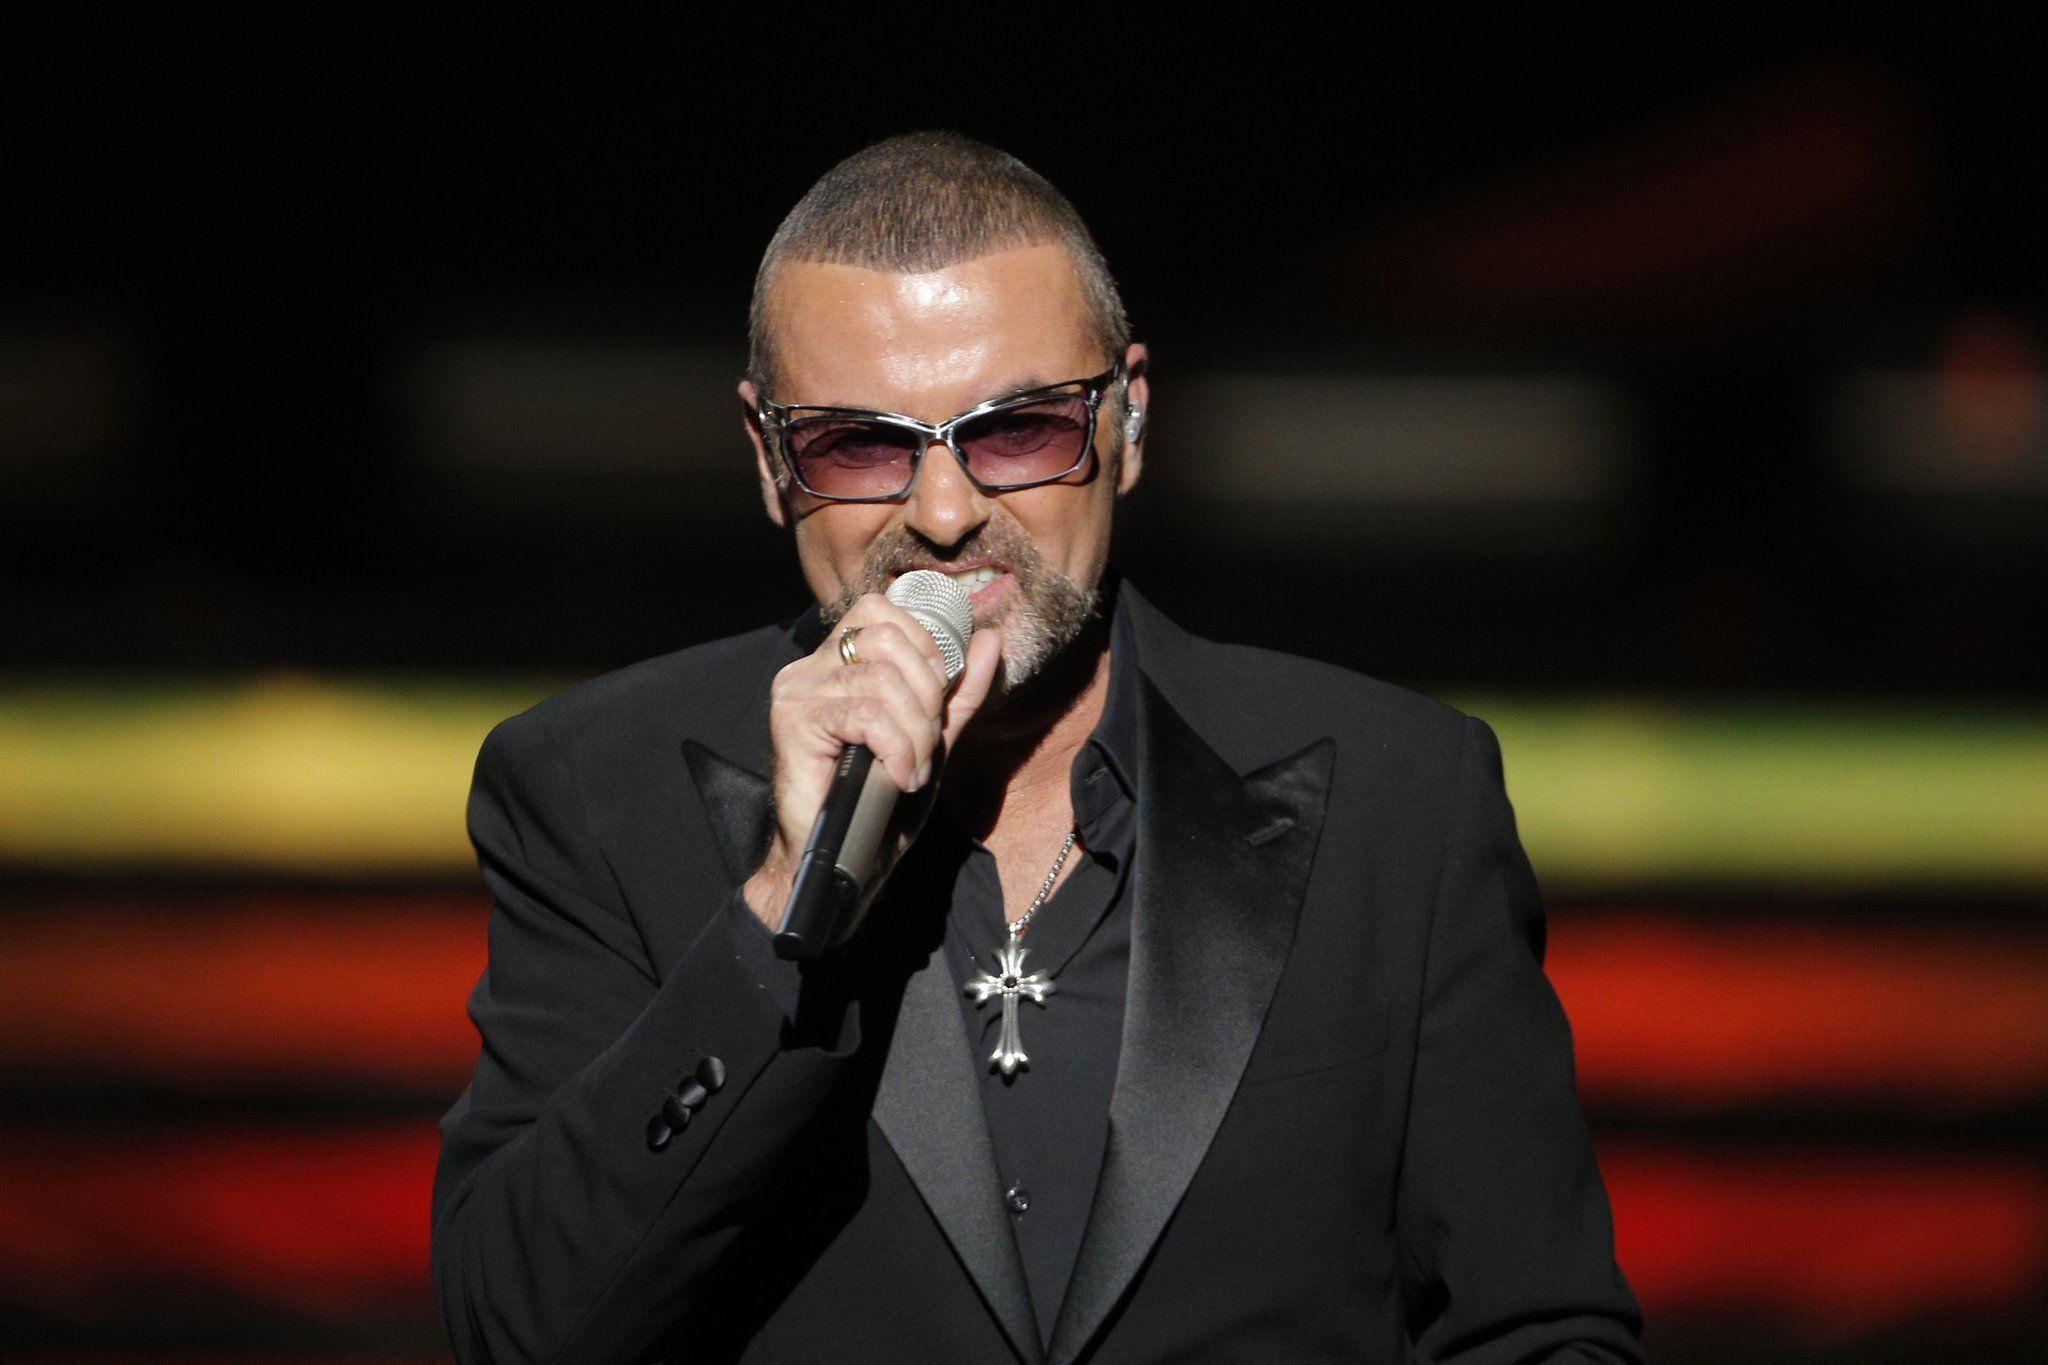 George Michael Wallpaper Image Photo Picture Background